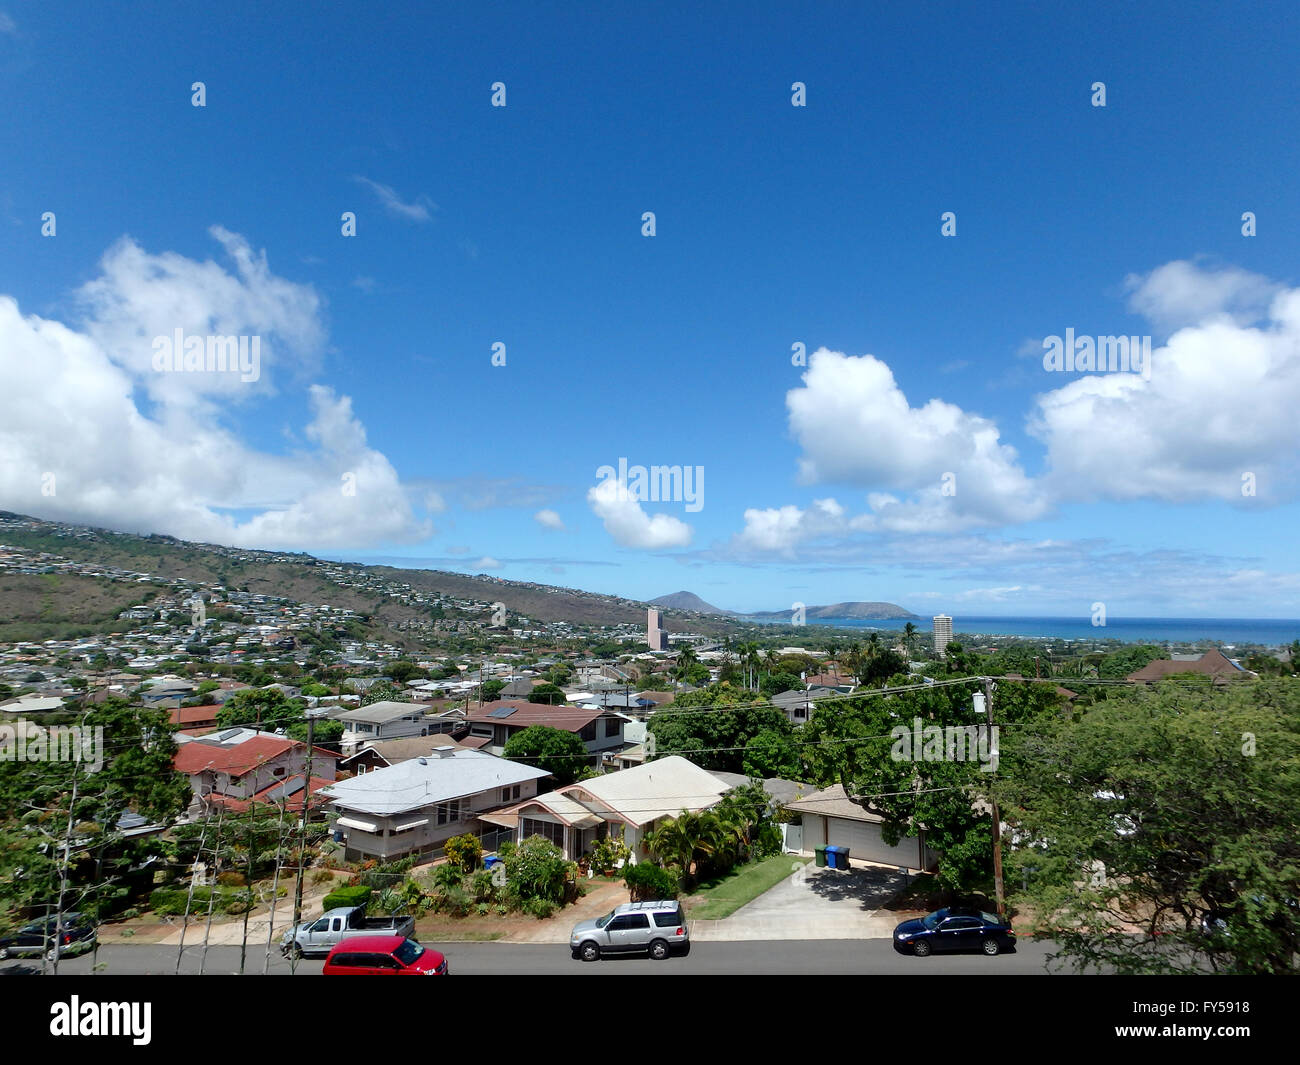 Kahala and South East corner of Oahu with Mountains, trees, houses, power lines and clouds in the sky. Stock Photo